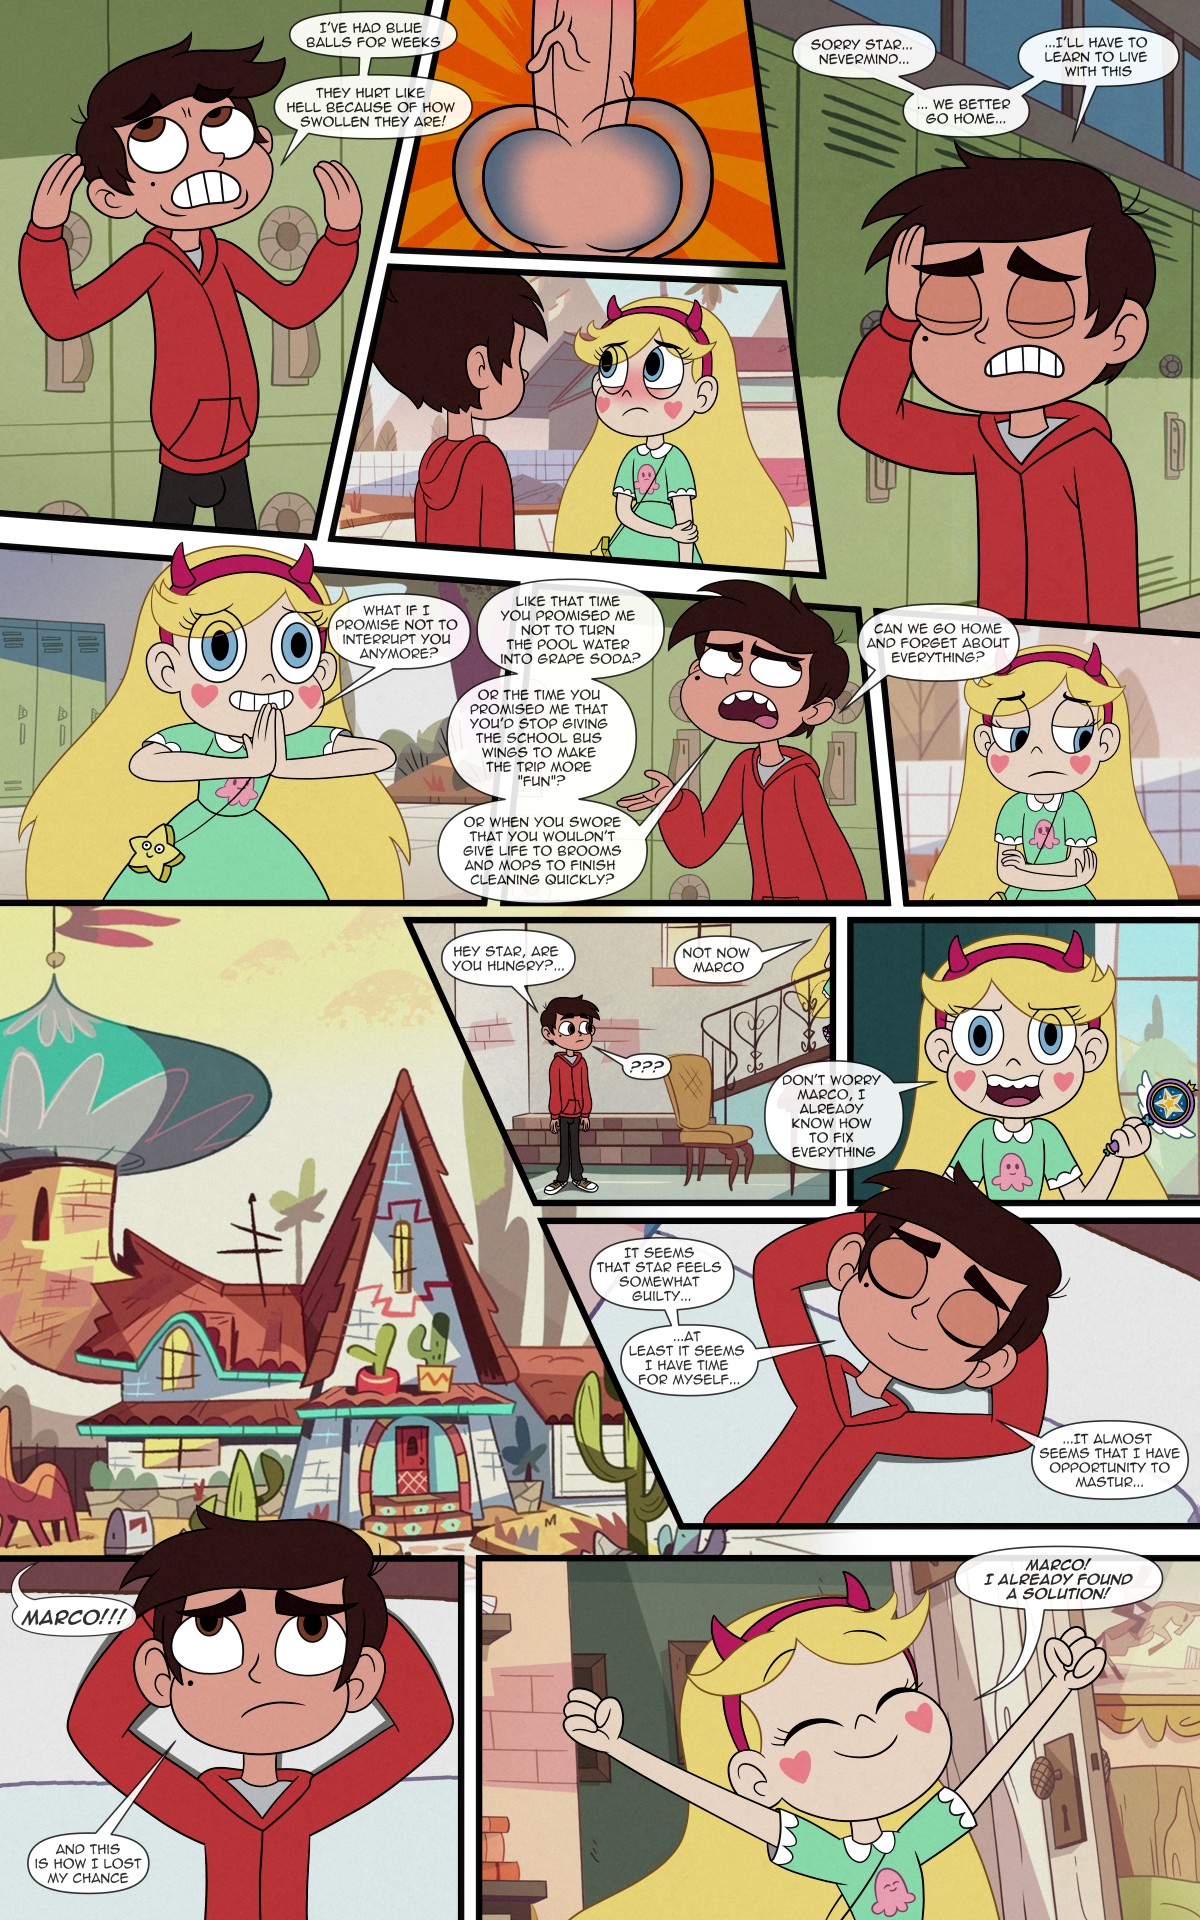 Time Together Star Vs The Forces Of Evil 06